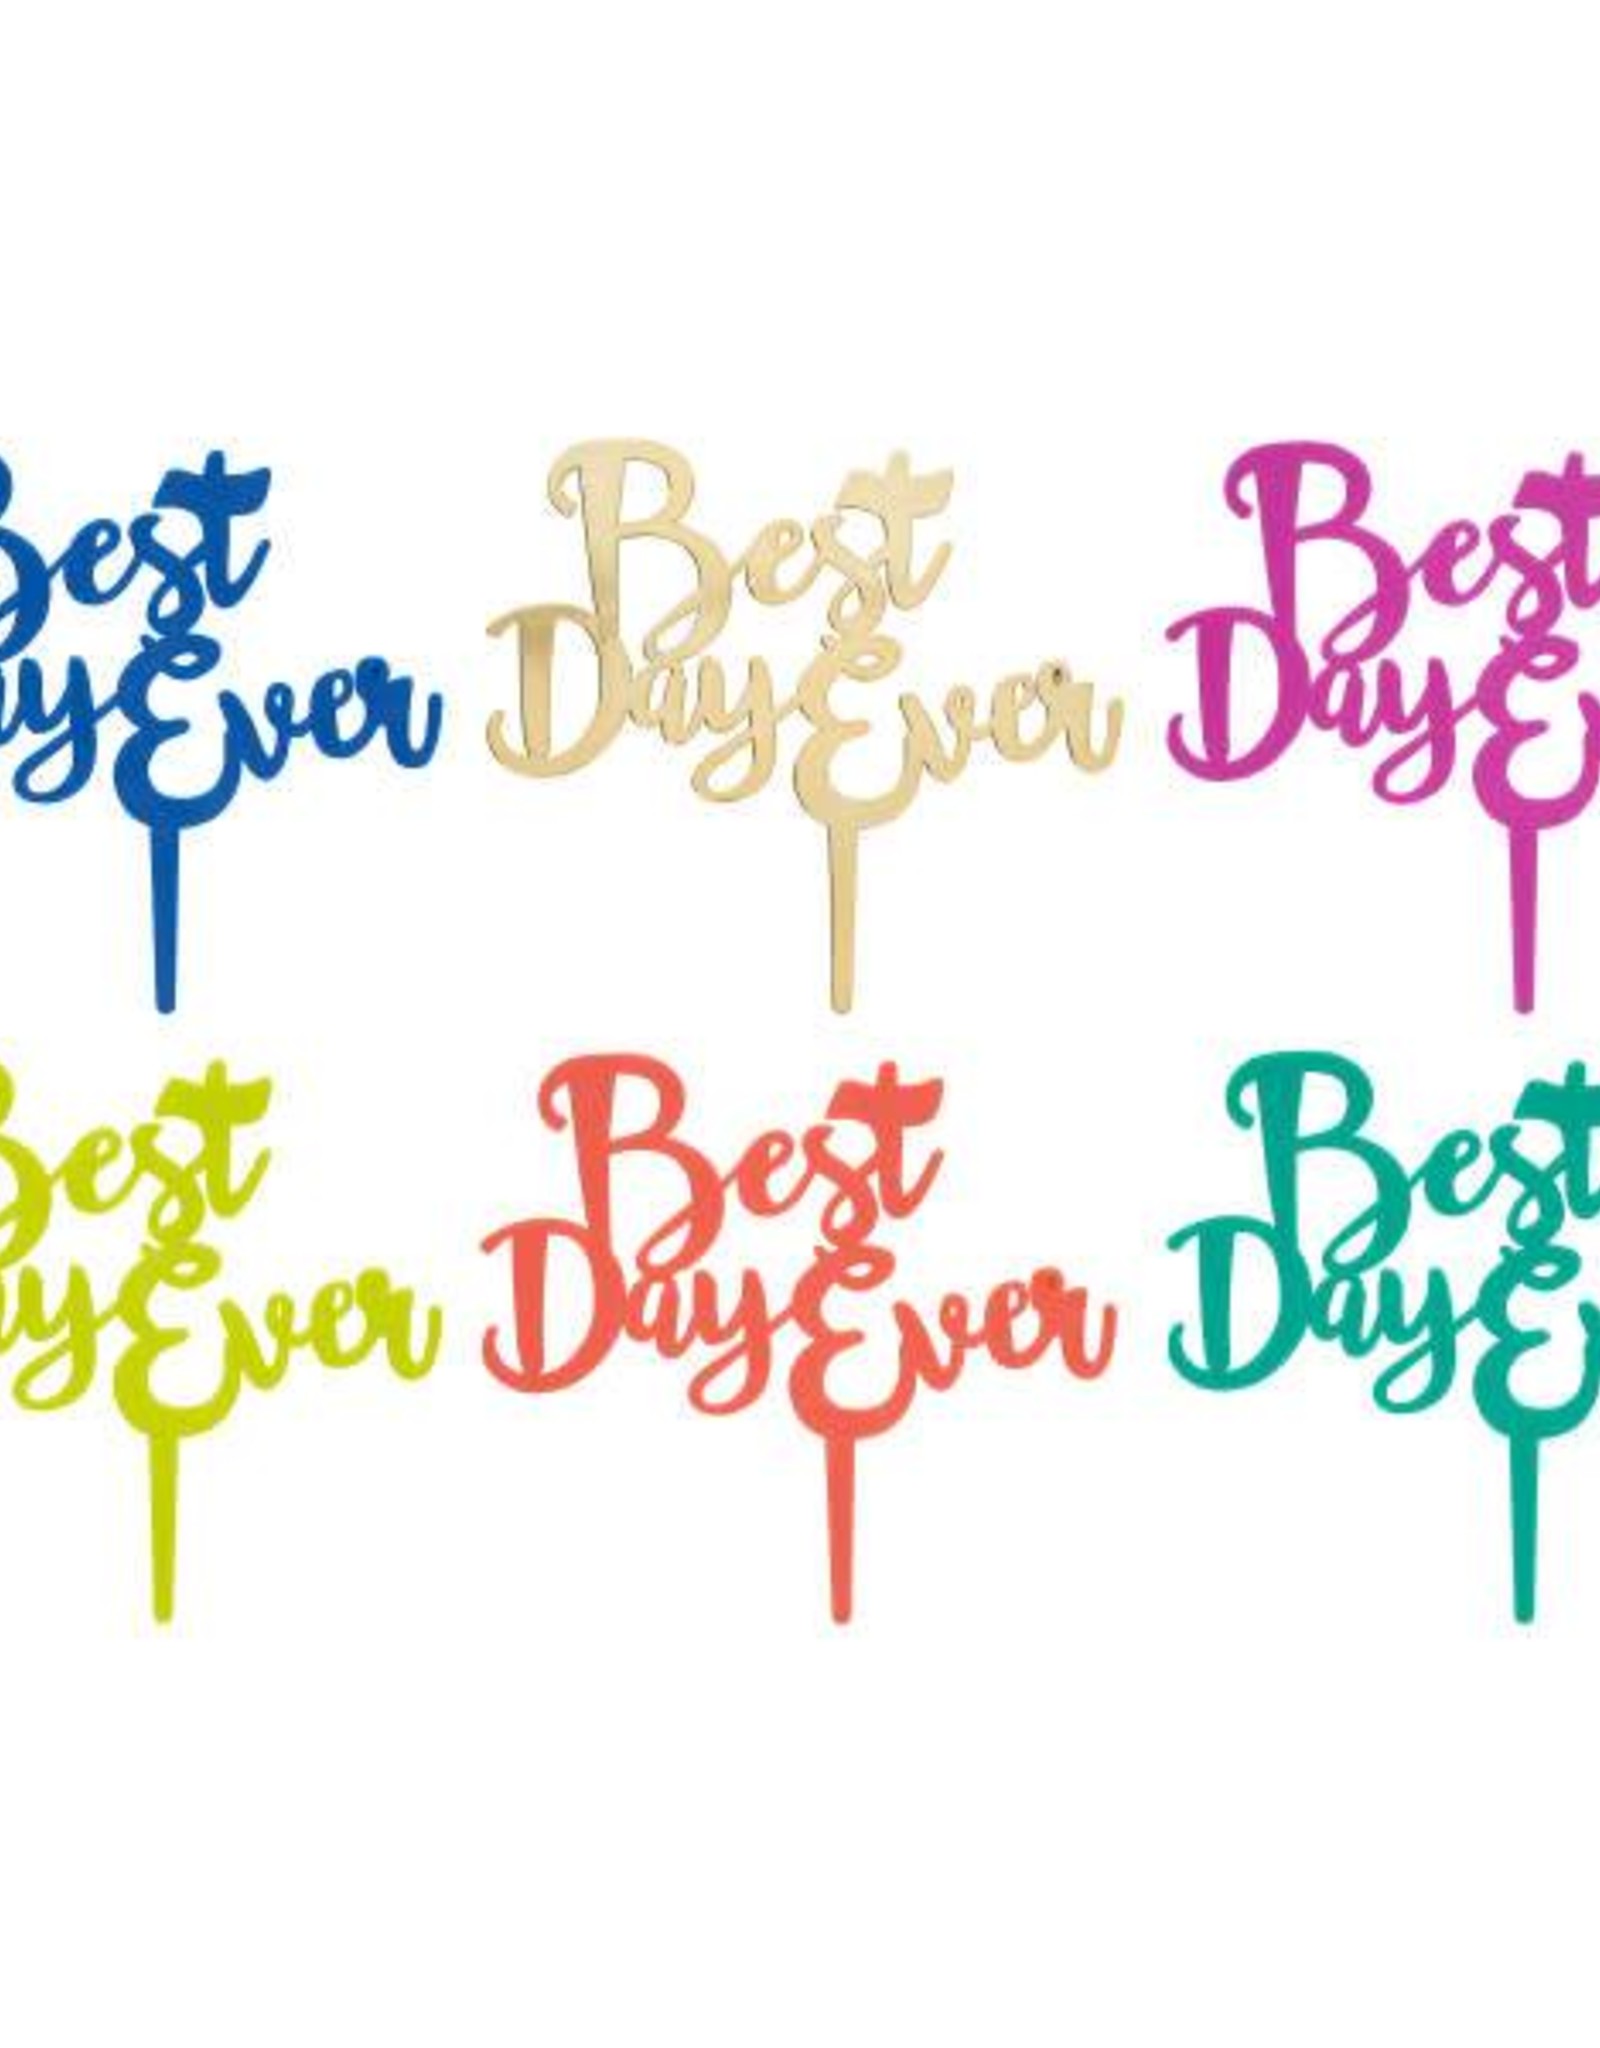 Best Day Ever Candle Holder Cake Topper